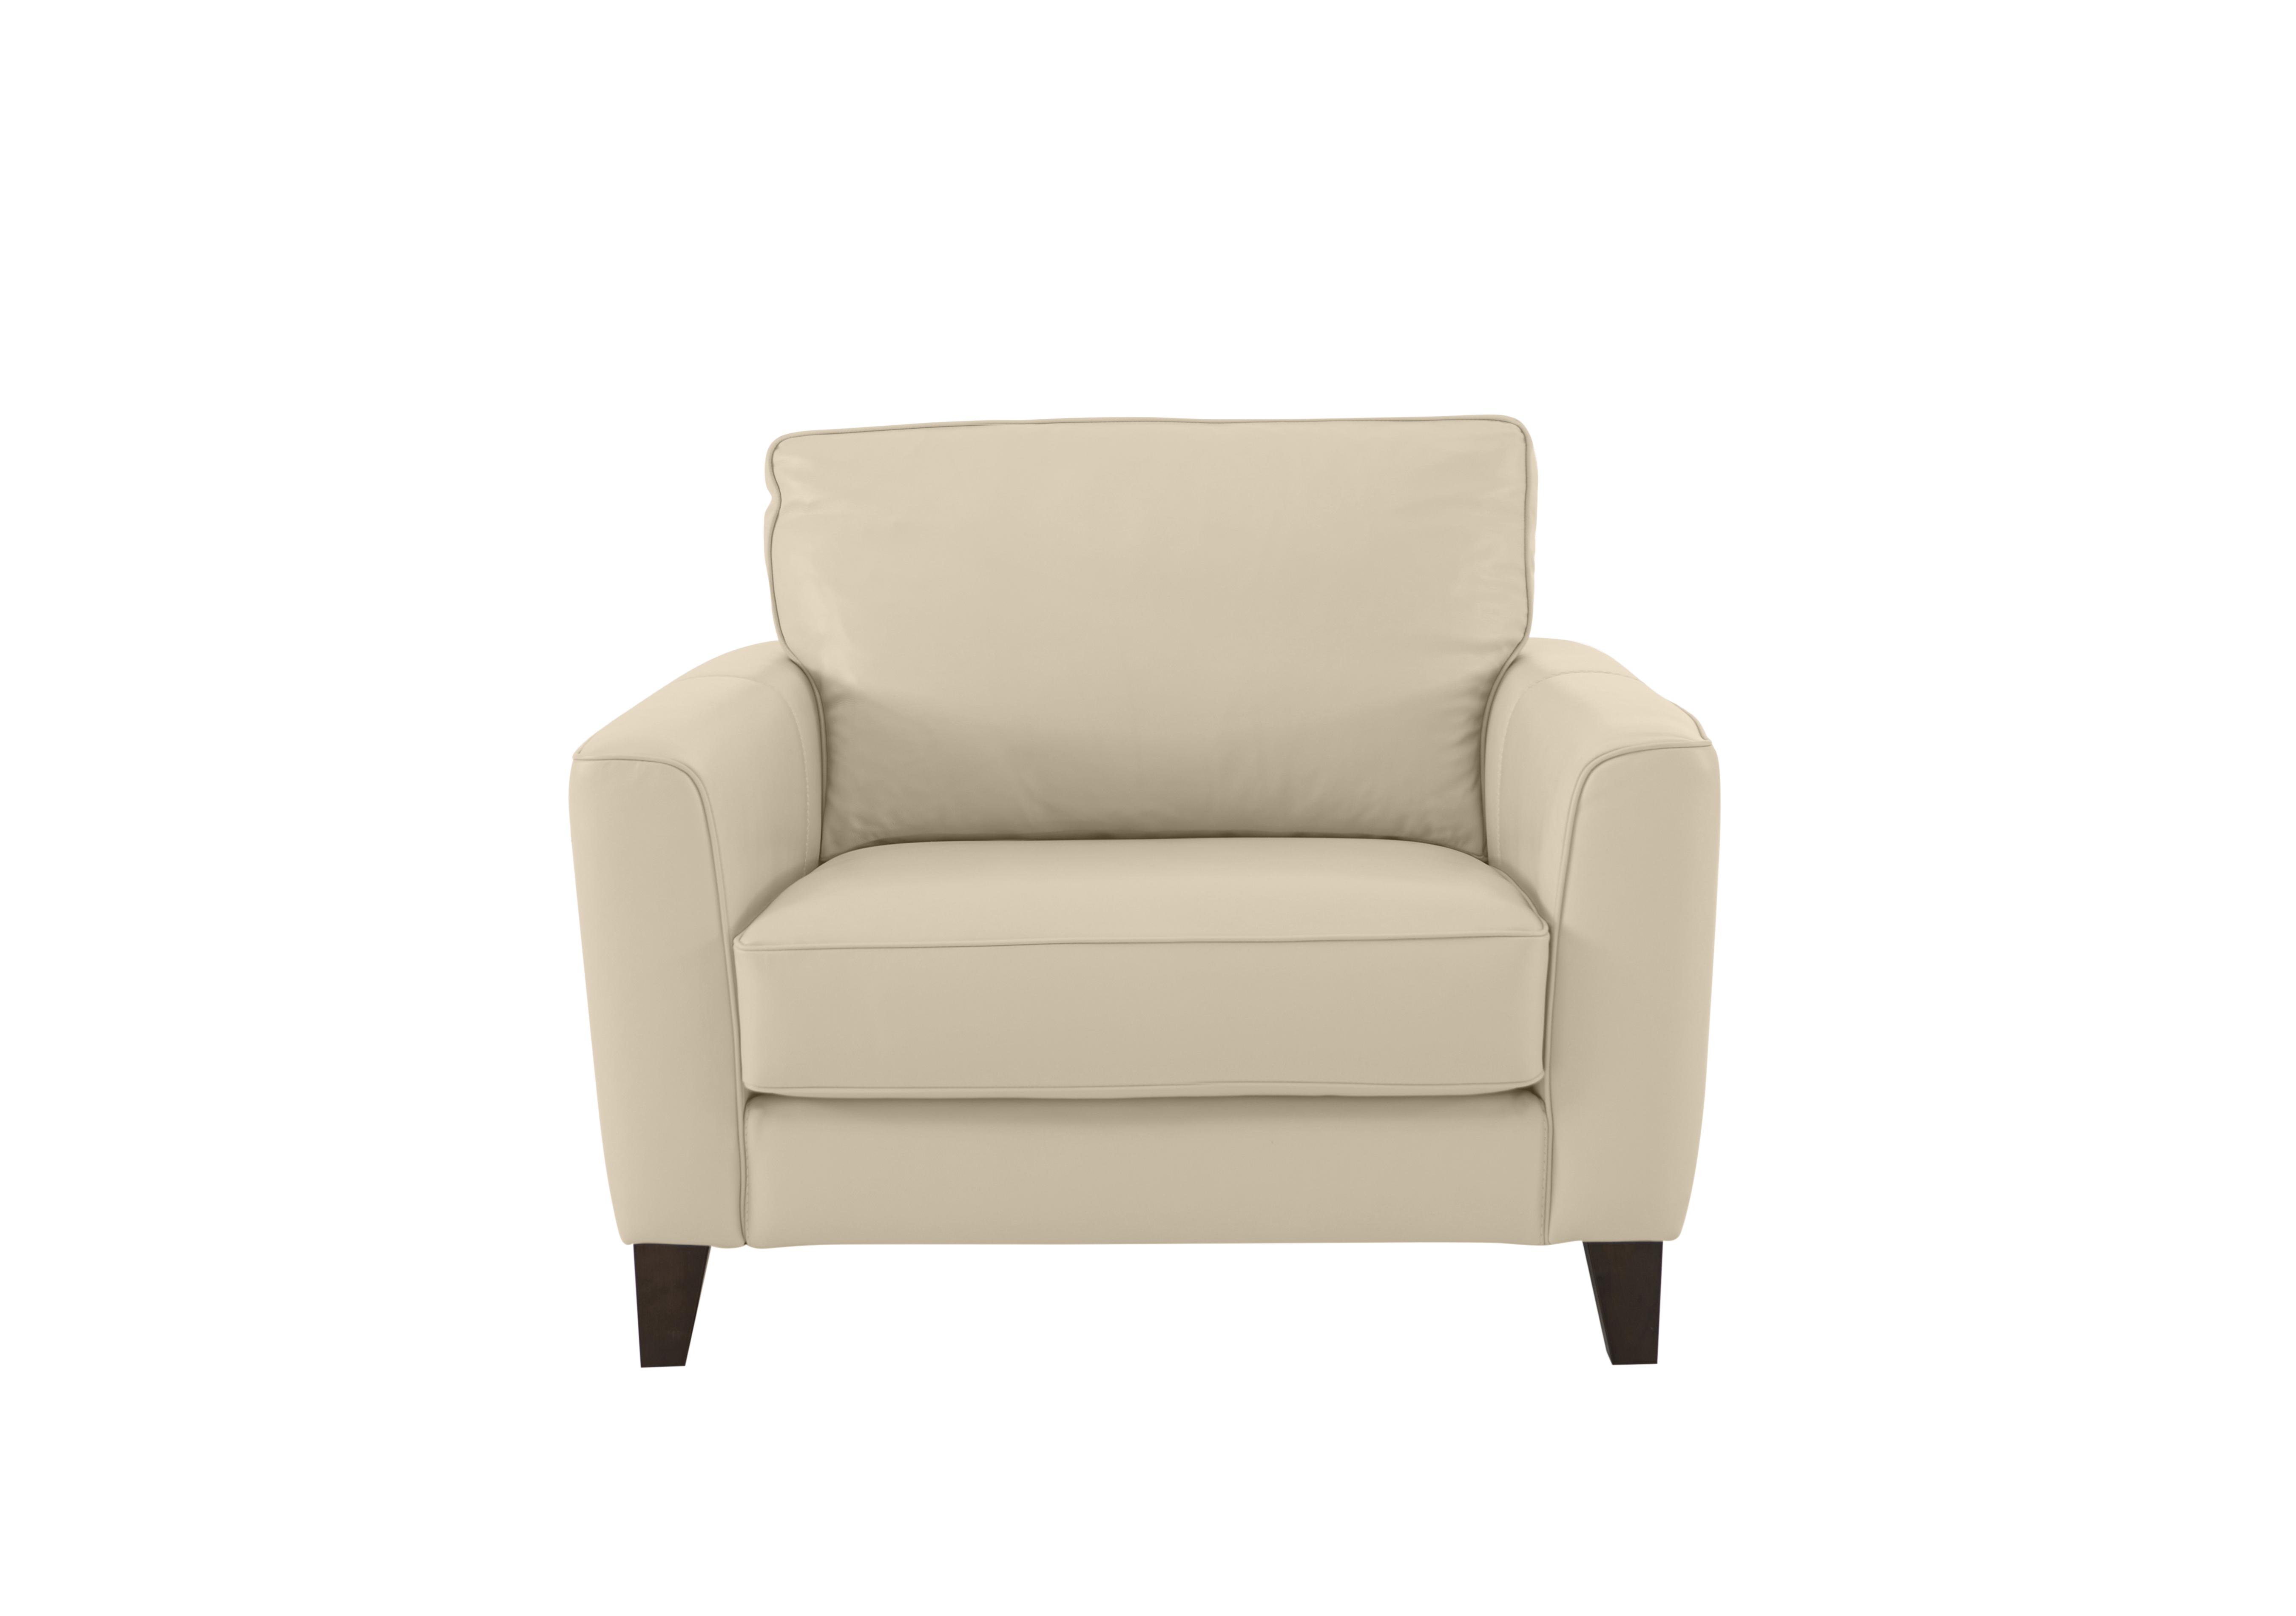 Brondby Leather Cuddle Chair in Bv-862c Bisque on Furniture Village